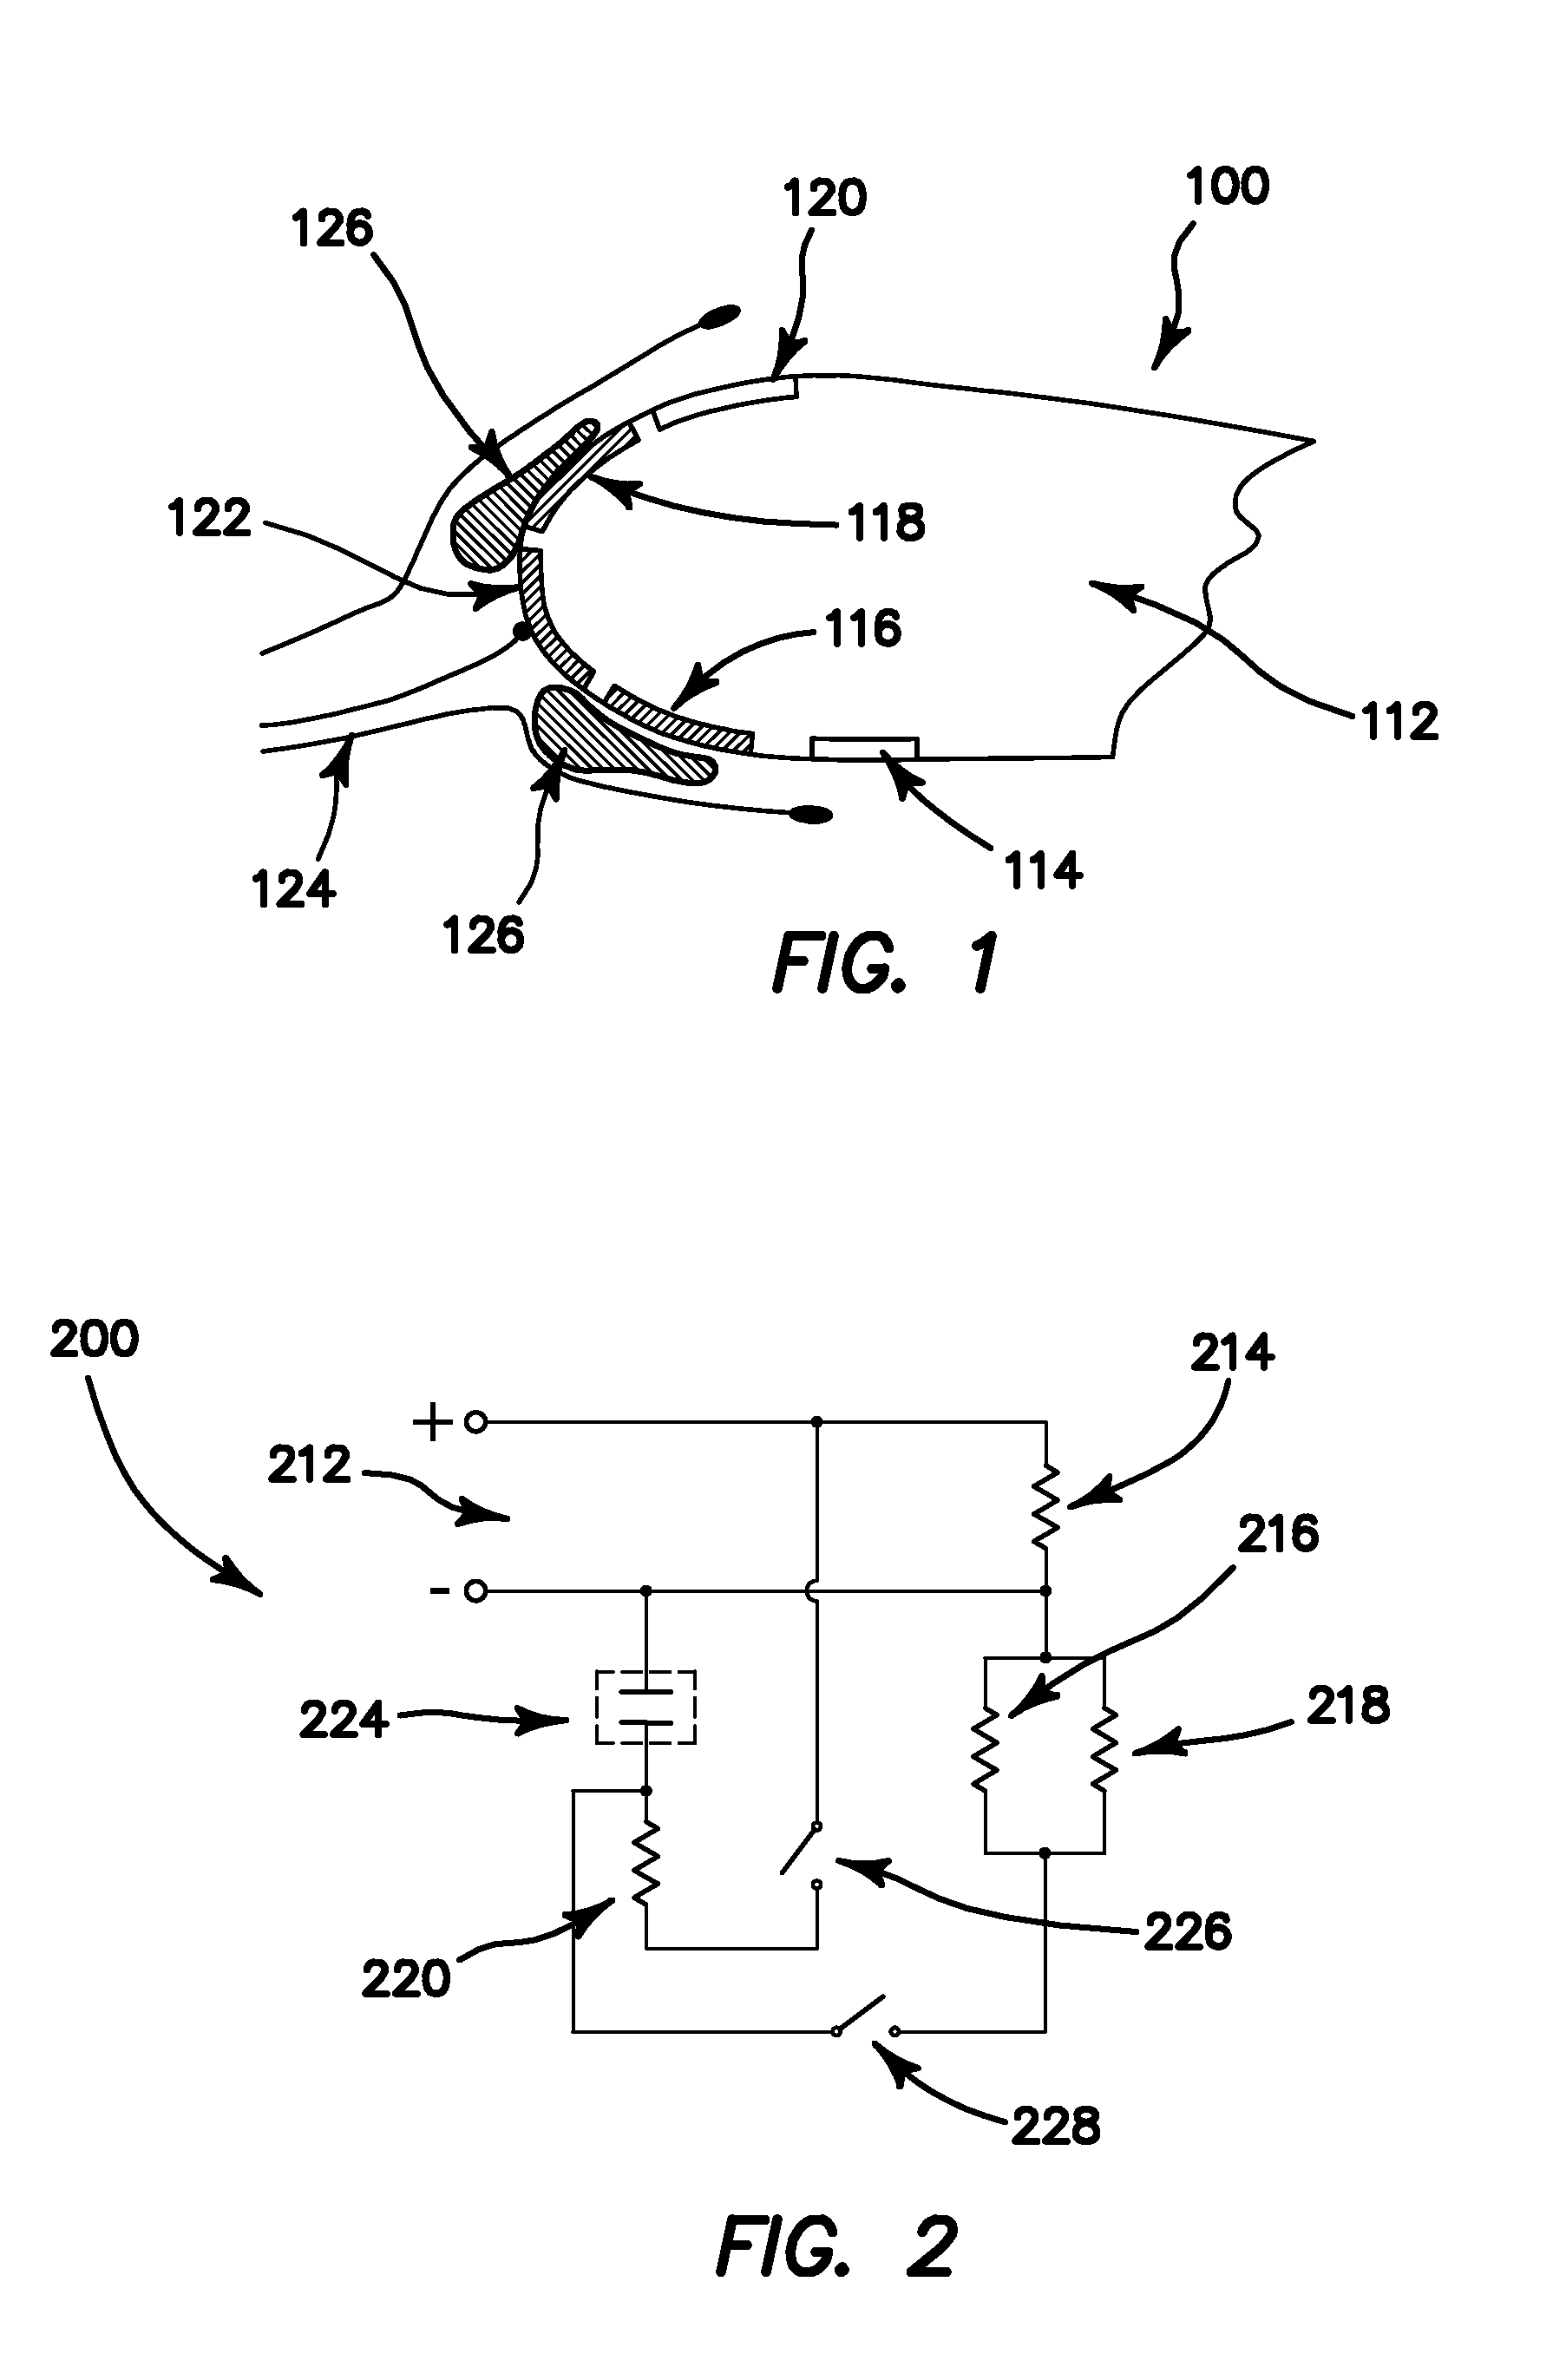 Anti-icing, de-icing, and heating configuration, integration, and power methods for aircraft, aerodynamic, and complex surfaces